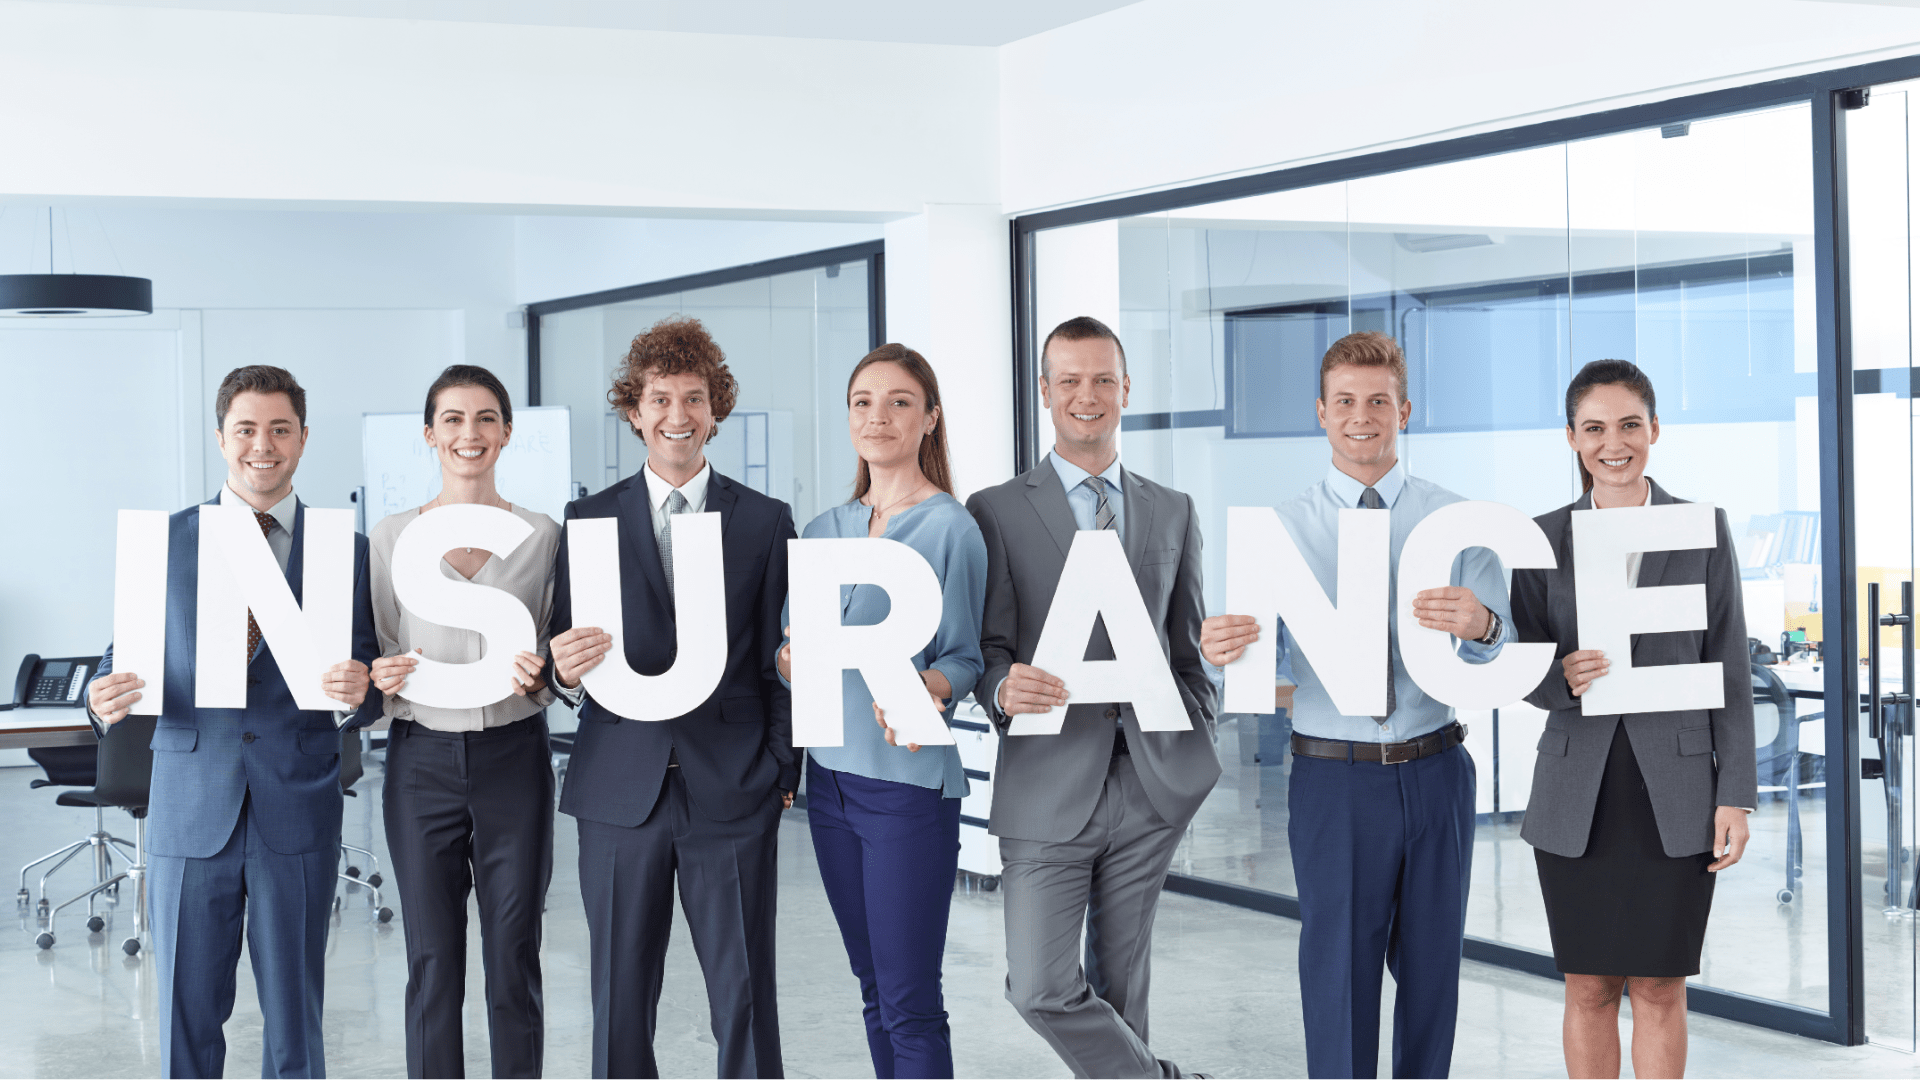 Upskilling product managers from an insurance sector startup